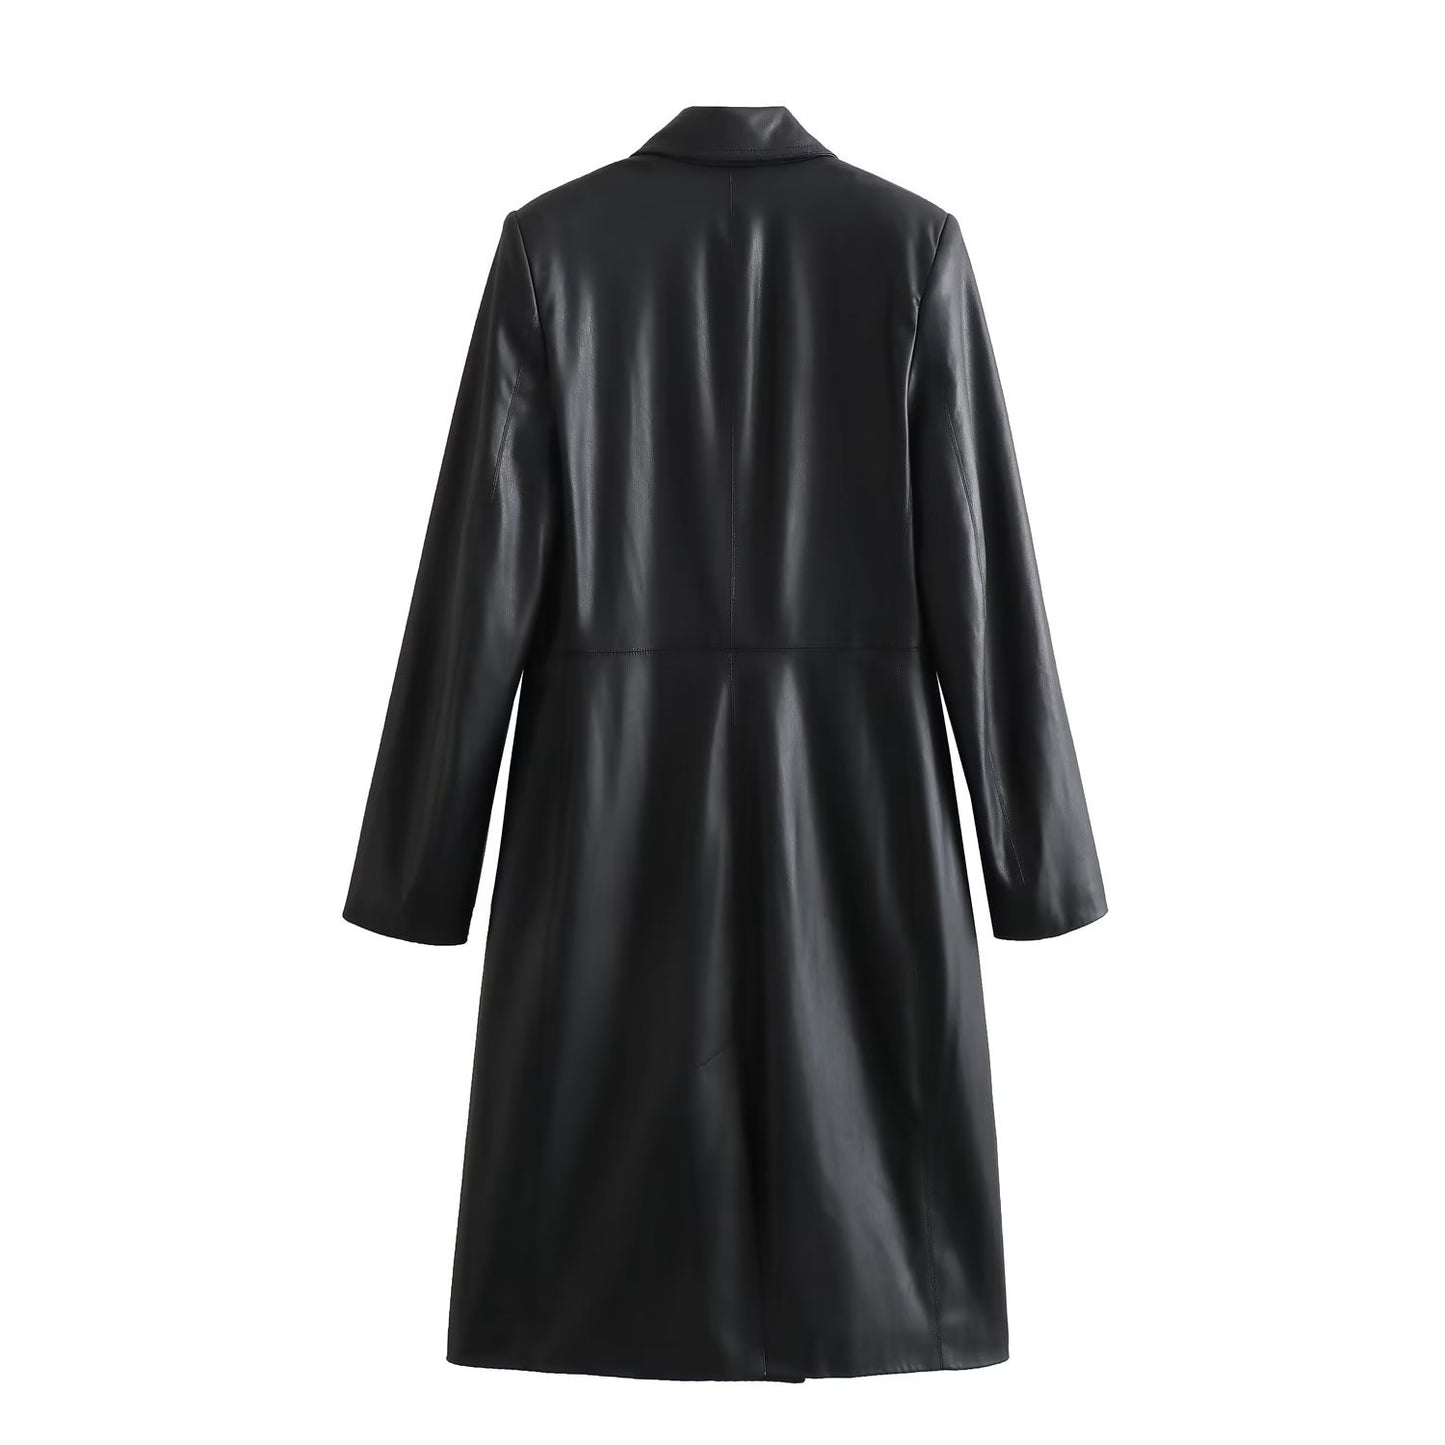 Autumn And Winter New Women's Clothing Loose Fashion Casual Imitation Leather Coat